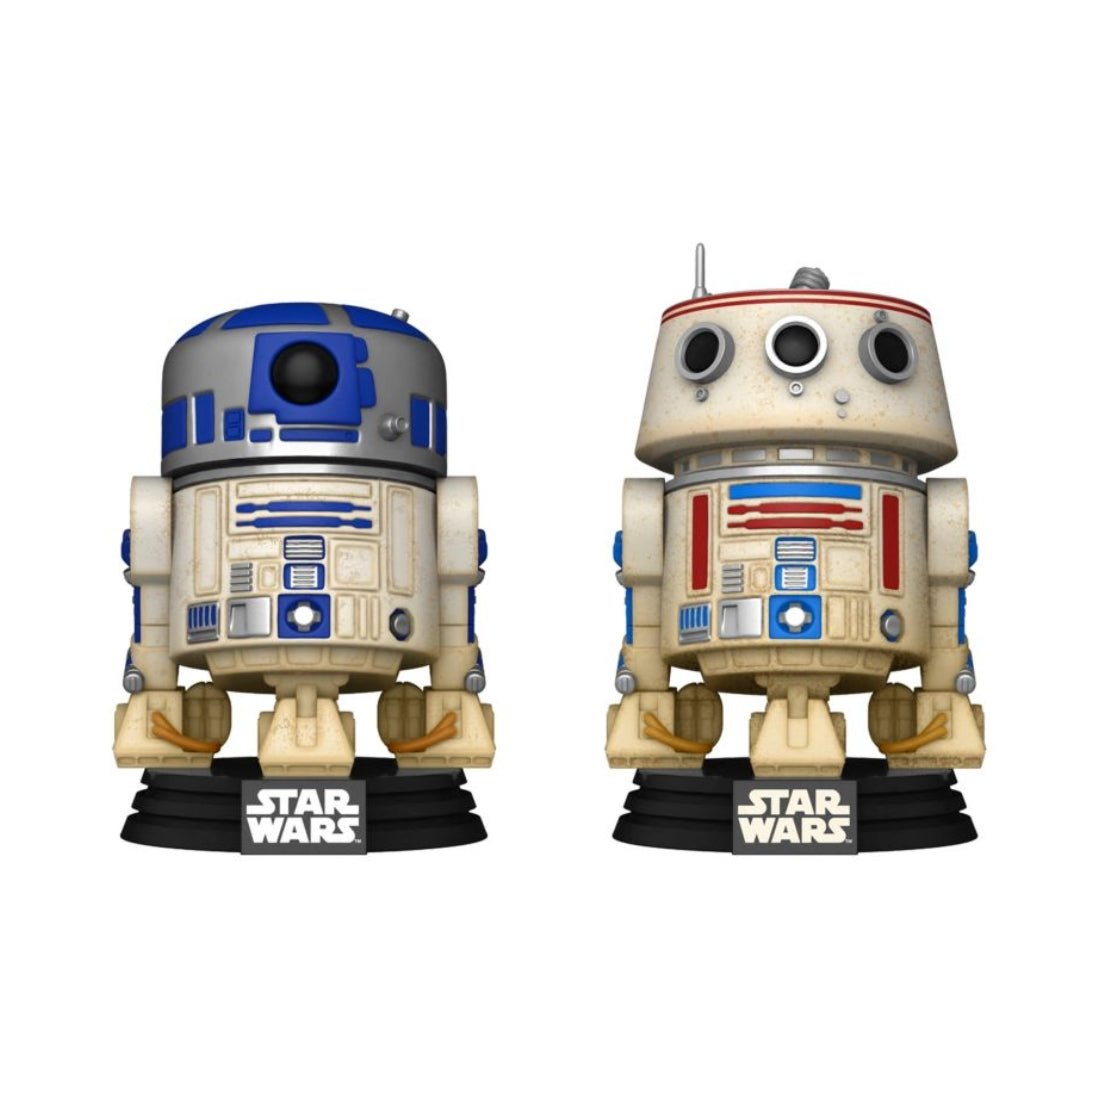 Funko Pop! Star Wars: R2D2 and R5D4 (Exc) #2Pack - دمية - Store 974 | ستور ٩٧٤